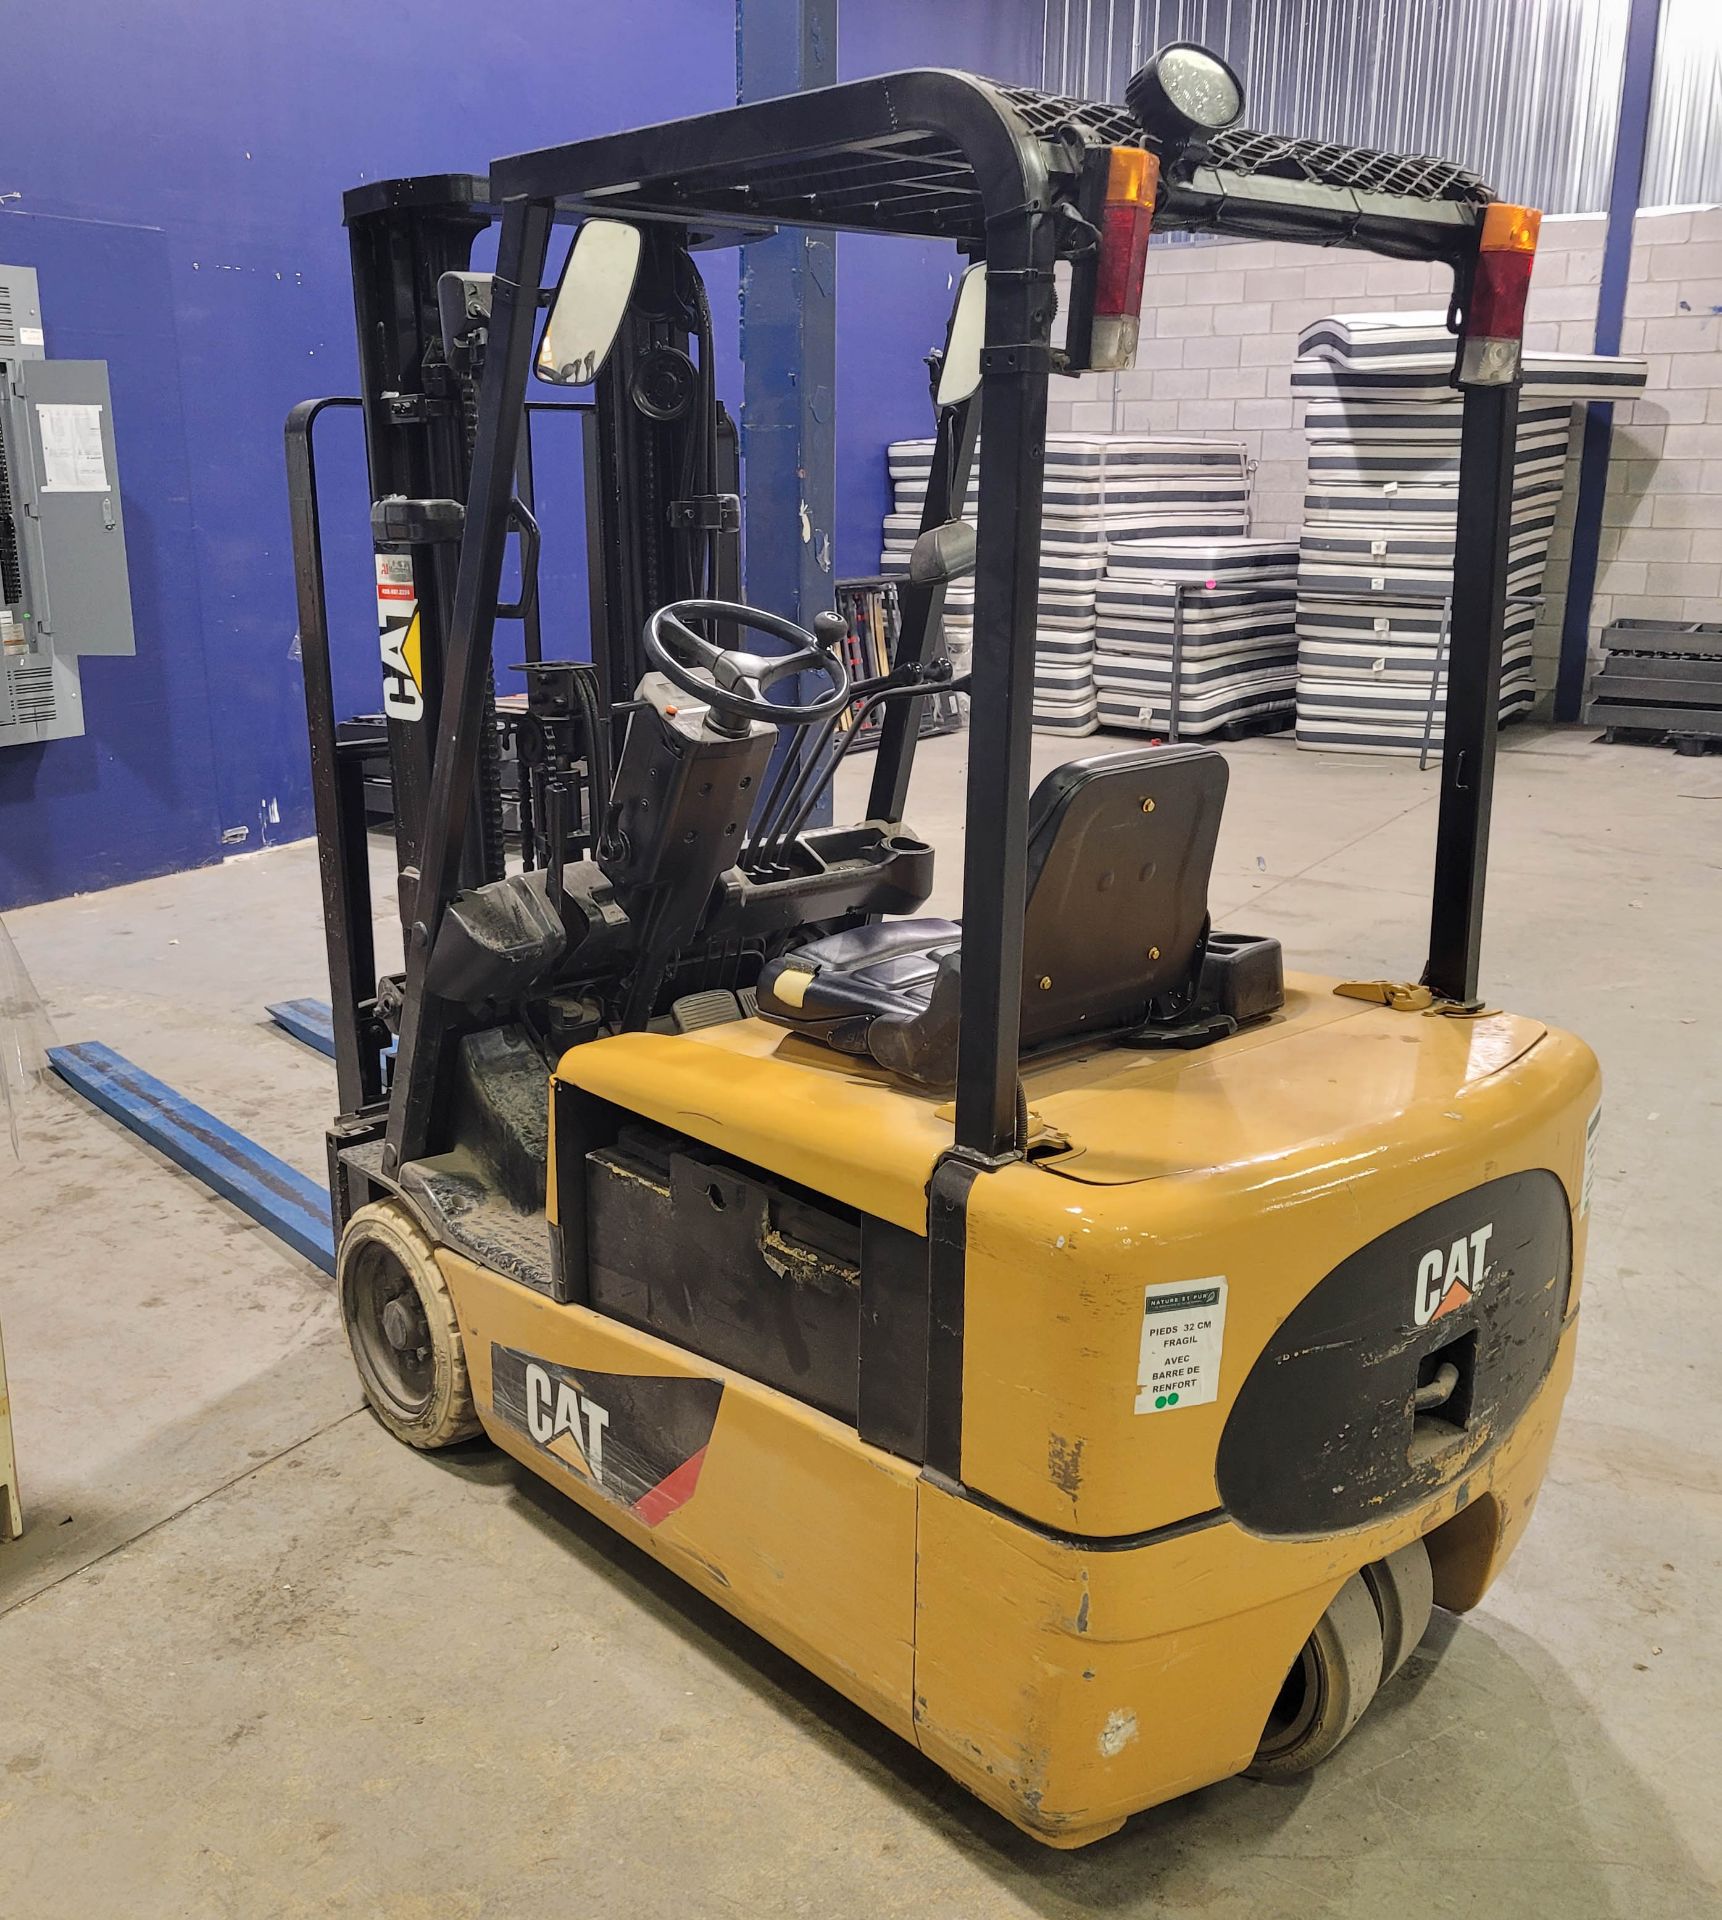 MITSUBISHI CATERPILLAR EP20KT 36V 3,950 LB CAPACITY ELECTRIC FORKLIFT WITH 188" MAXIMUM VERTICAL - Image 3 of 12